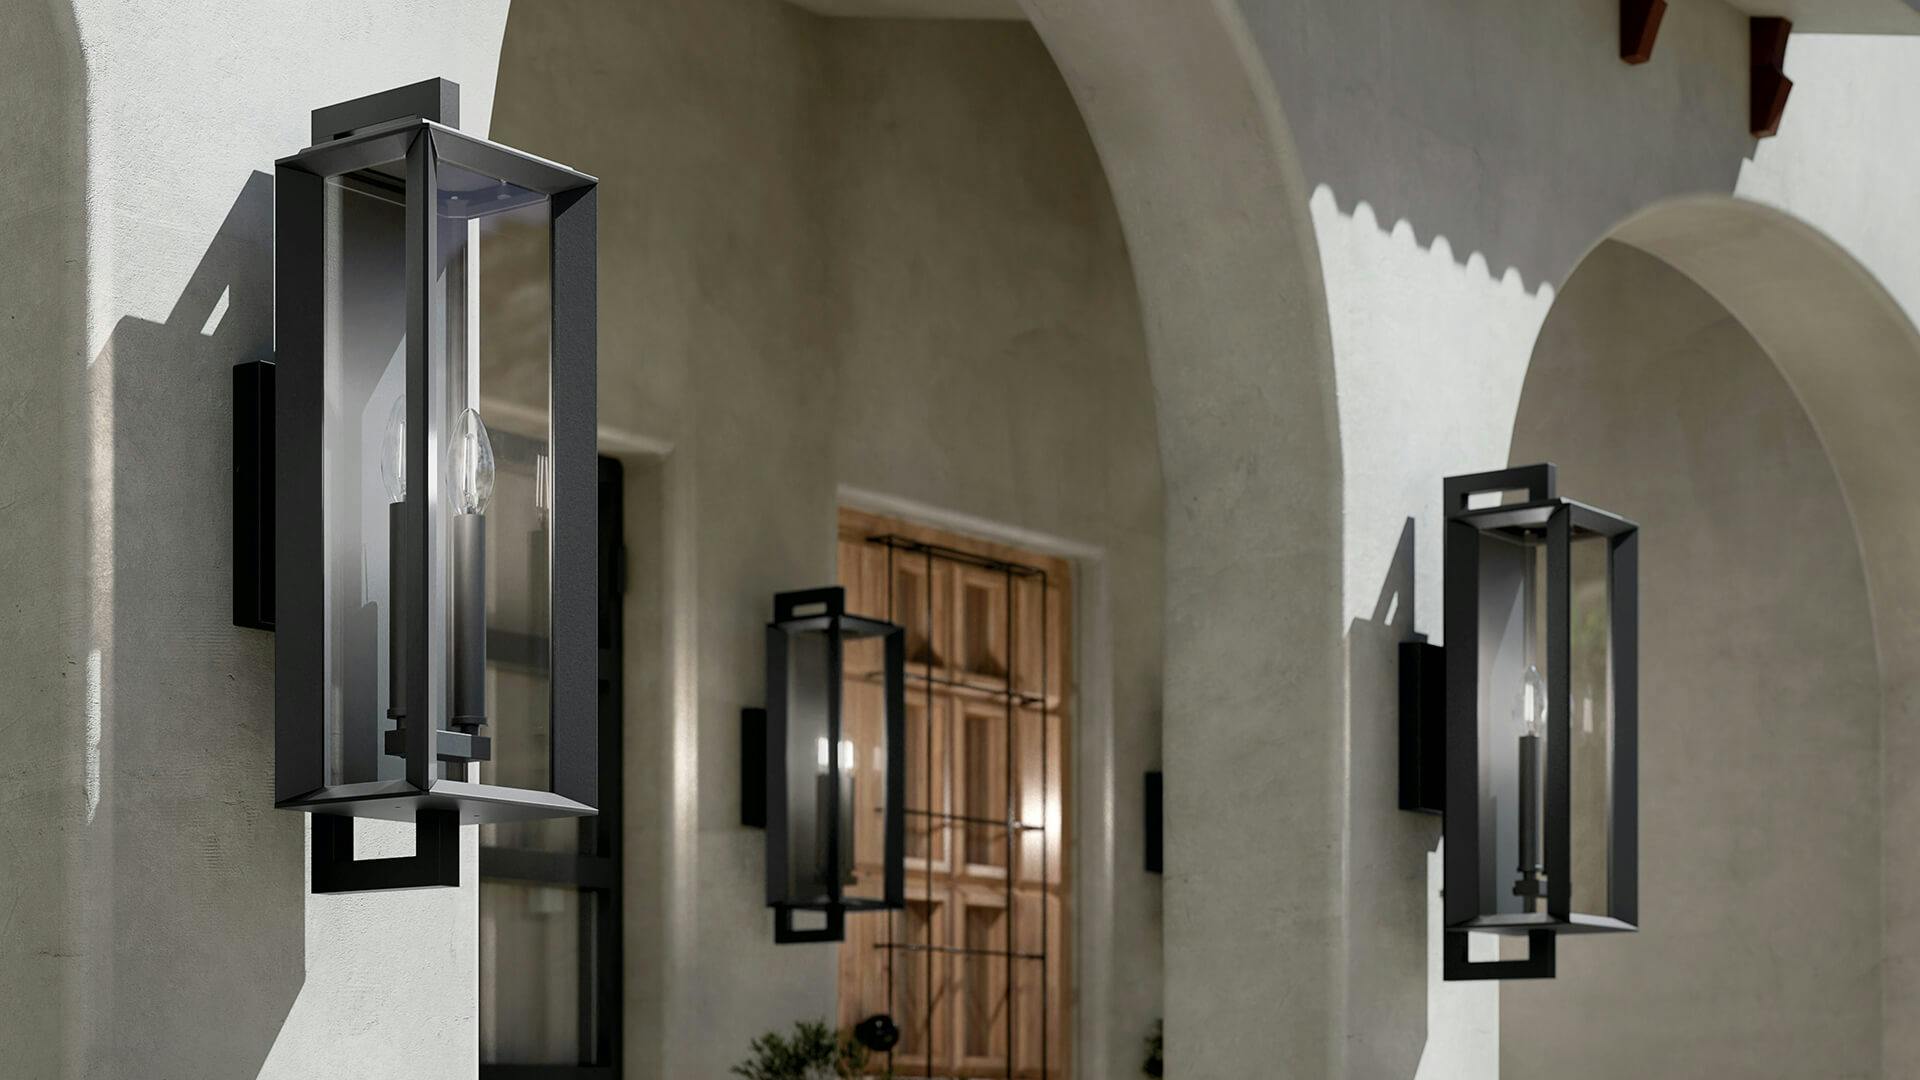 Exterior during the day with three kroft wall sconces in black finish